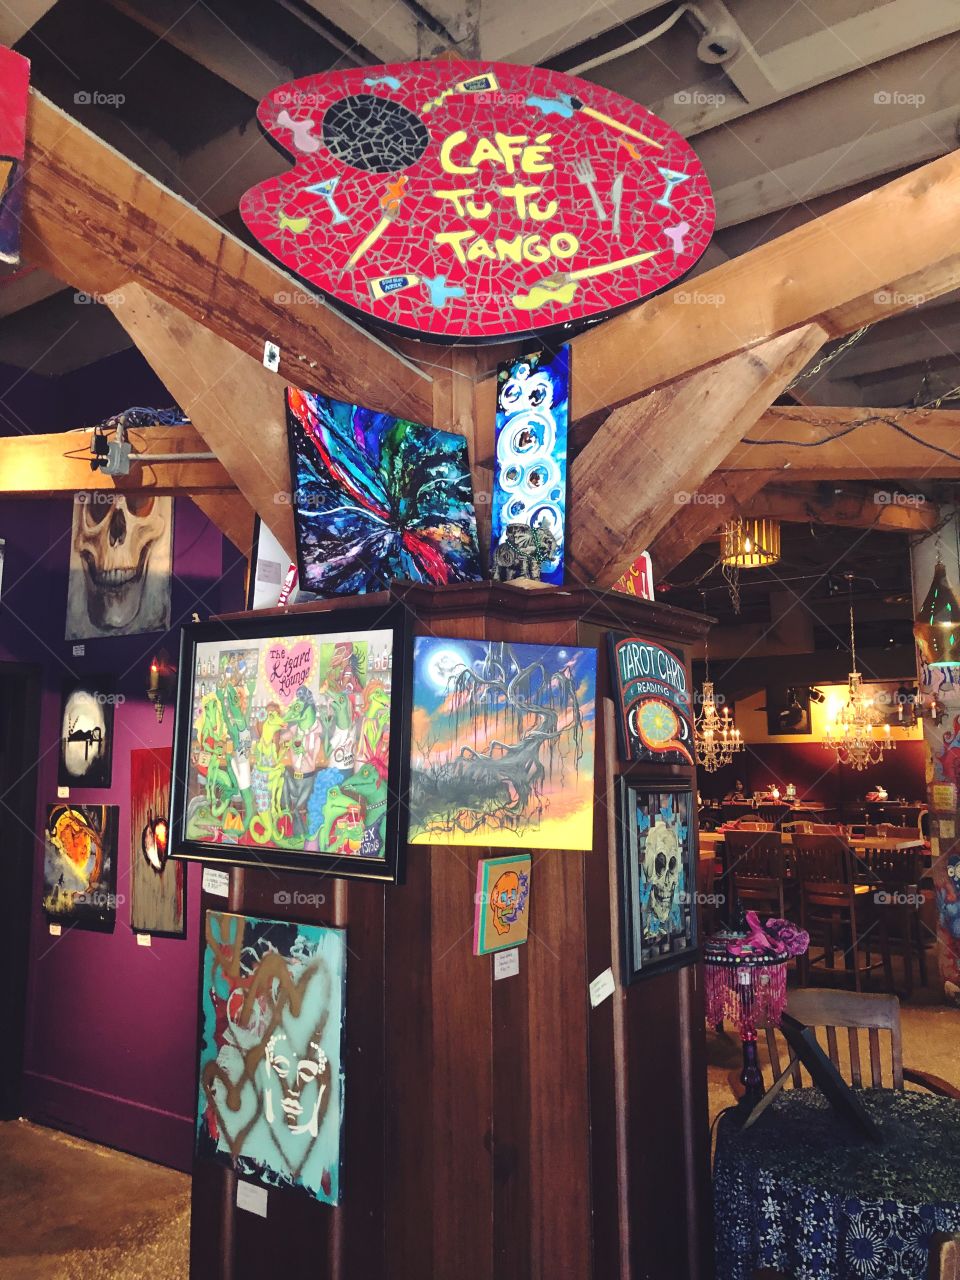 Beautifully designed and brightly colored works of art in a small town cafe. 